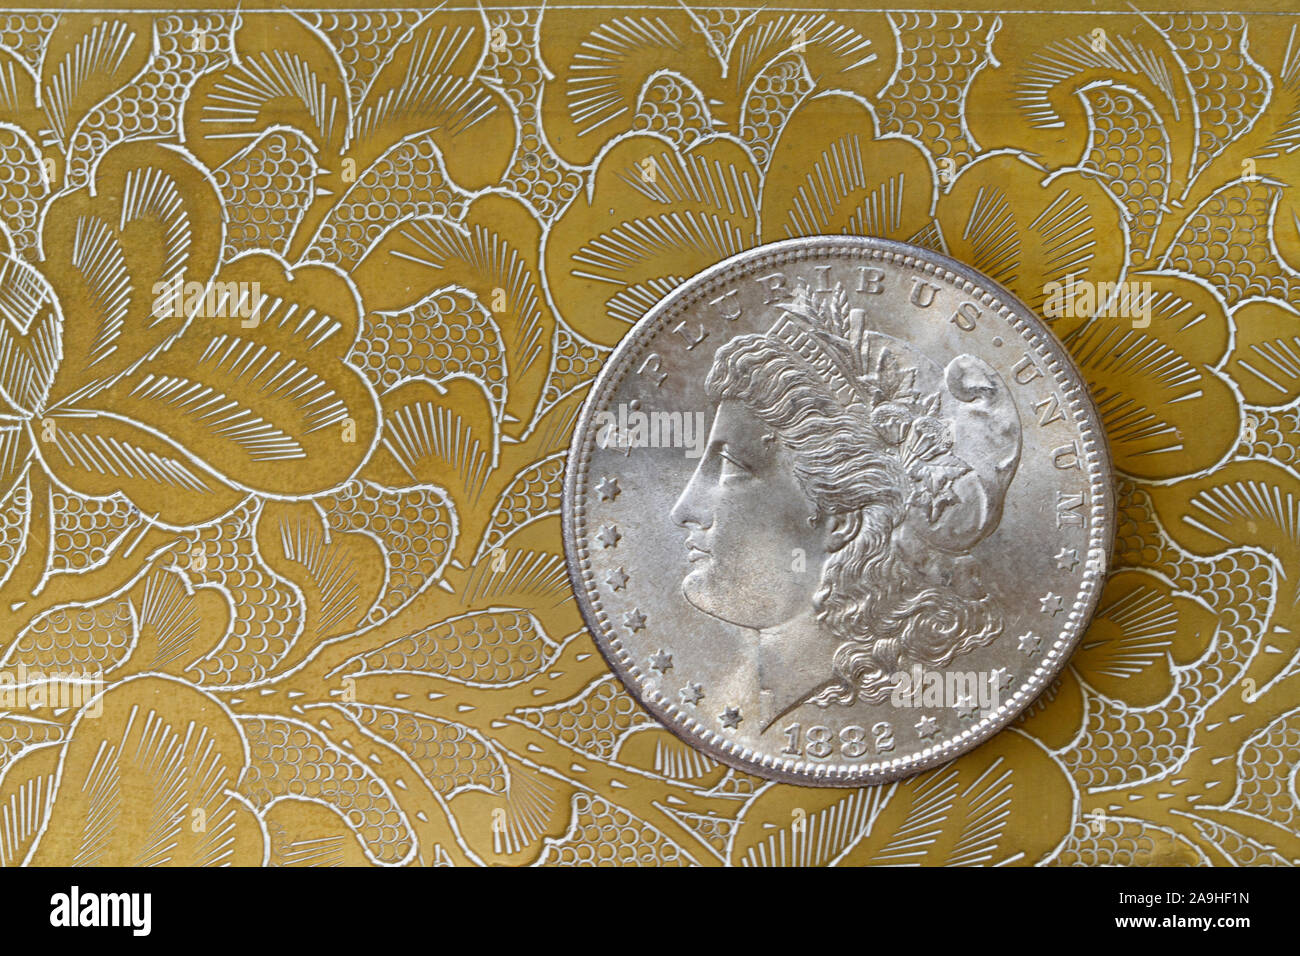 Uncirculated Morgan Silver Dollar against Gold tones of a Brass Background Stock Photo